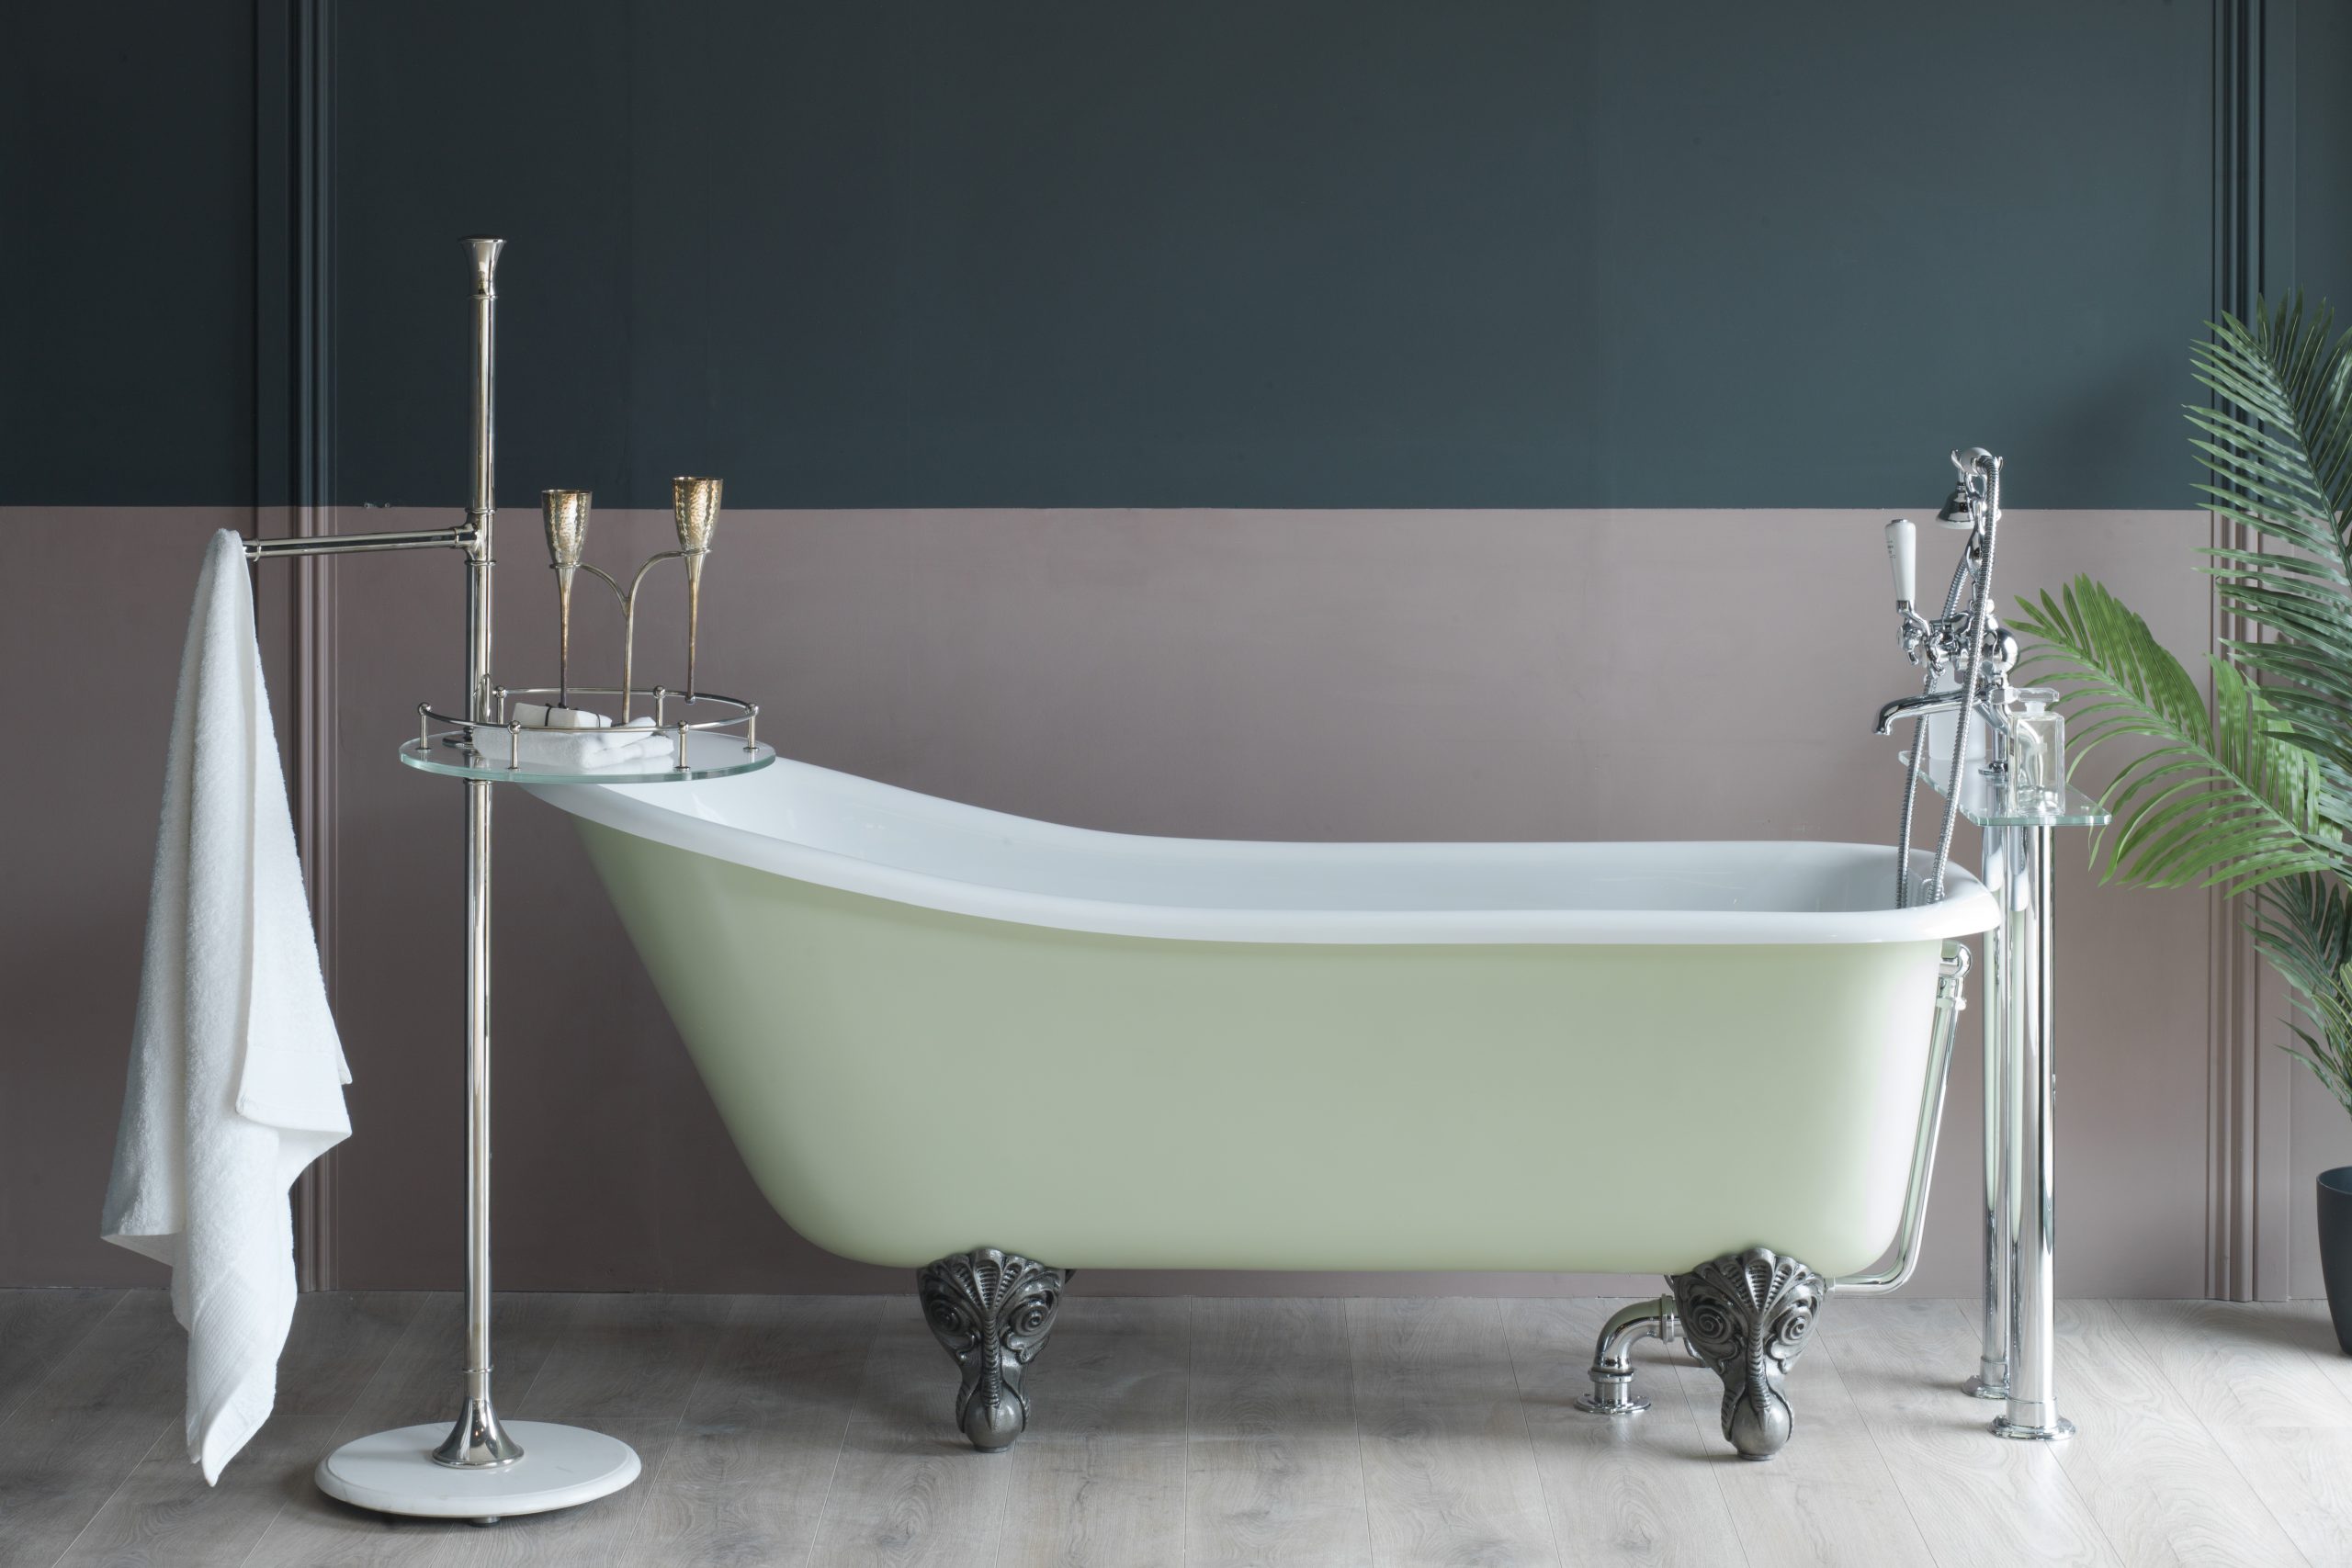 Albion's Neptune Slipper Bath in a traditional green colour. All baths can be expertly sprayed to a colour of your choice.